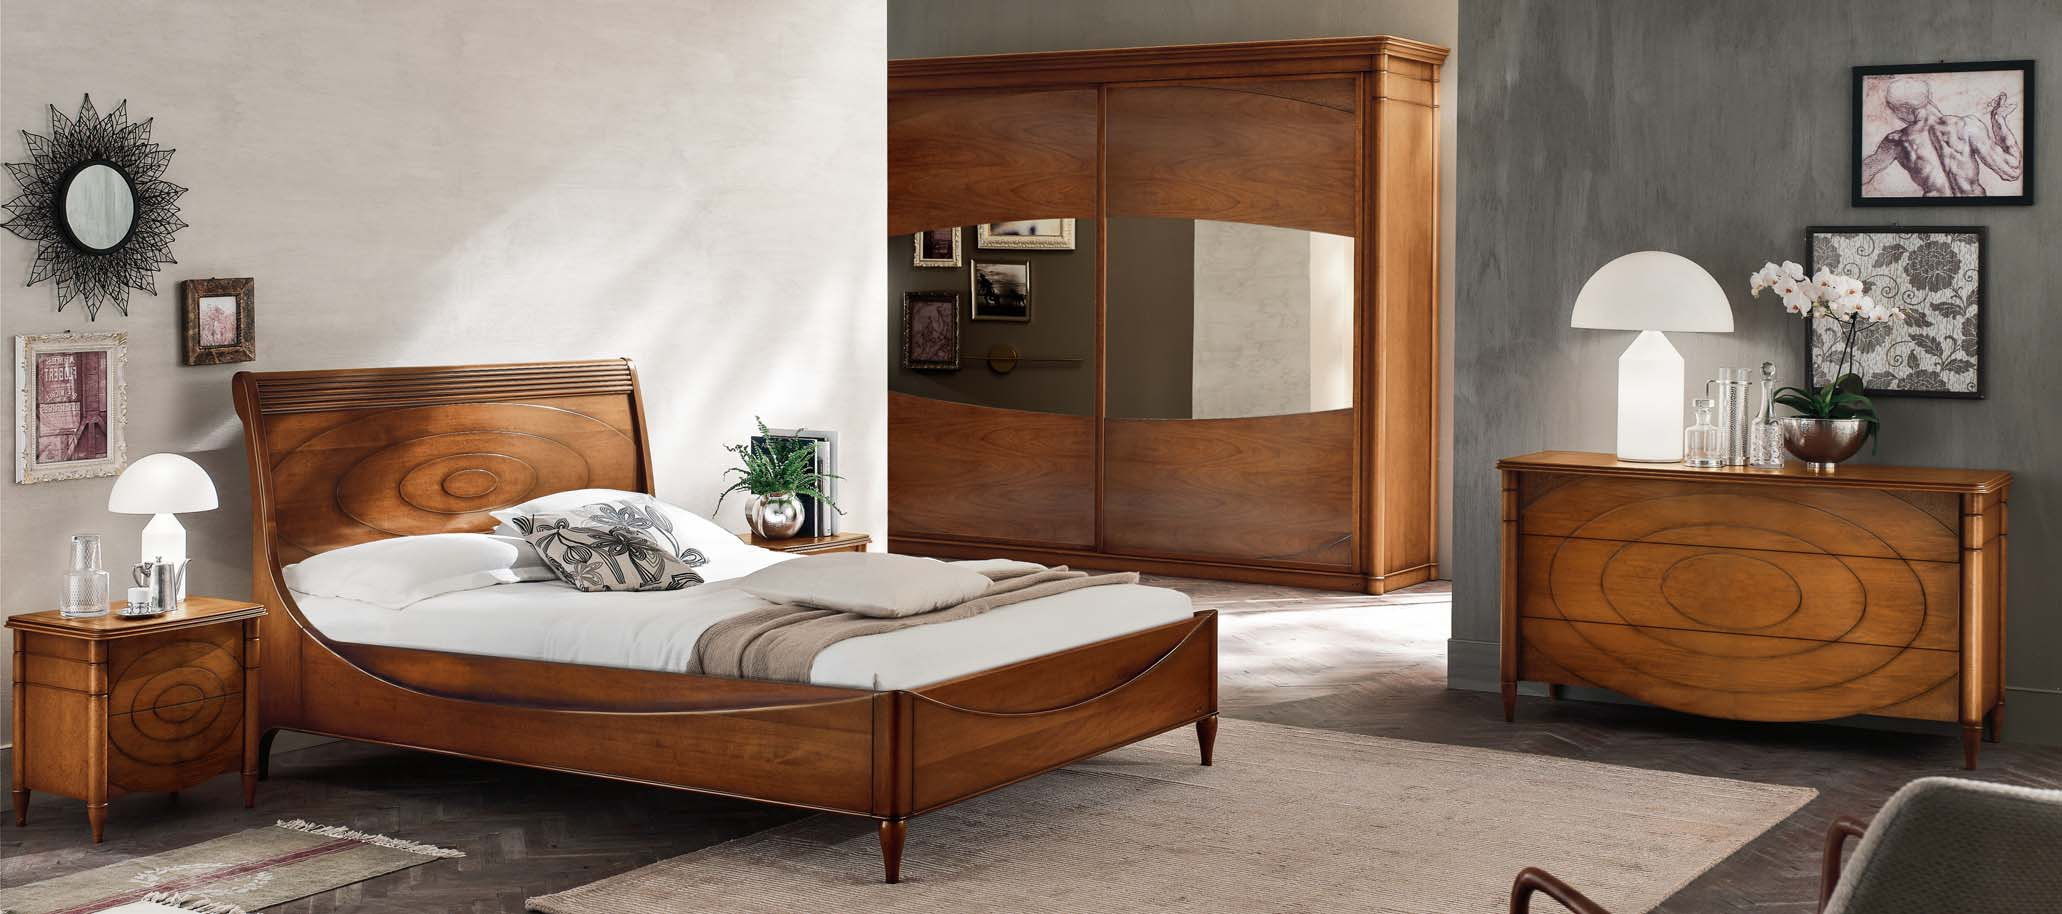 N 1 Collection uno 52 N 1 collection N148 LETTO SENZA PEDIERA, SPONDE DRITTE / BED WITHOUT FOOTBOARD. FINITURA / FINISH: AMBRA. N111 COMÒ A TRE CASSETTI / CHEST OF DRAWERS WITH THREE DRAWERS.